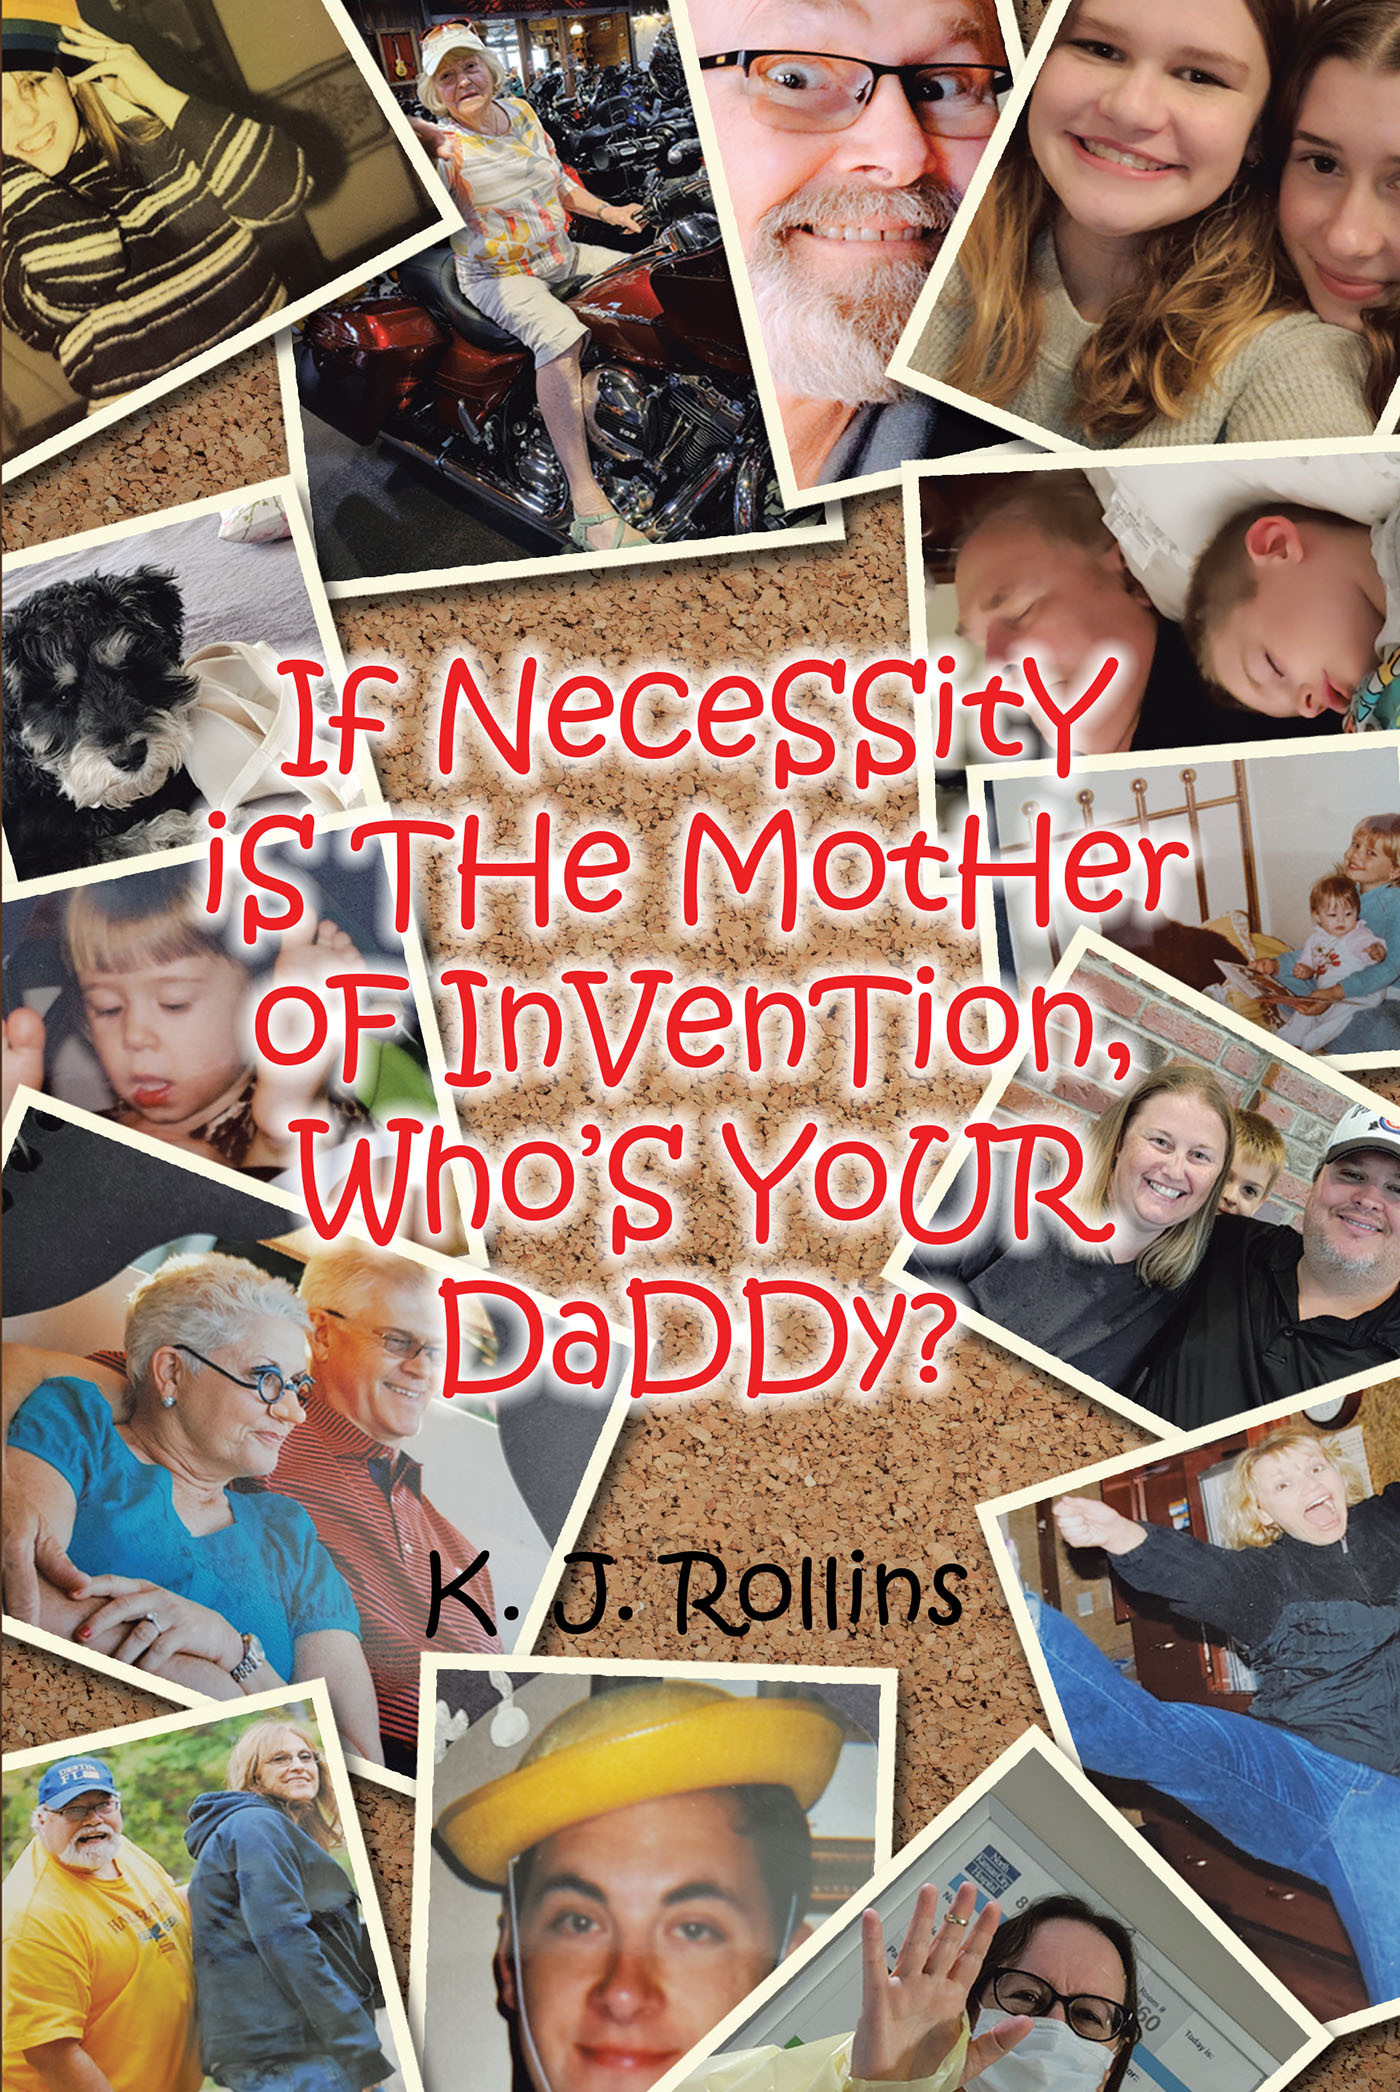 K. J. Rollins’s Newly Released “If NeceSSitY iS THe MotHer oF InVenTion, Who’S YoUR DaDDy?” is a Collection of Humorous and Impactful Short Stories